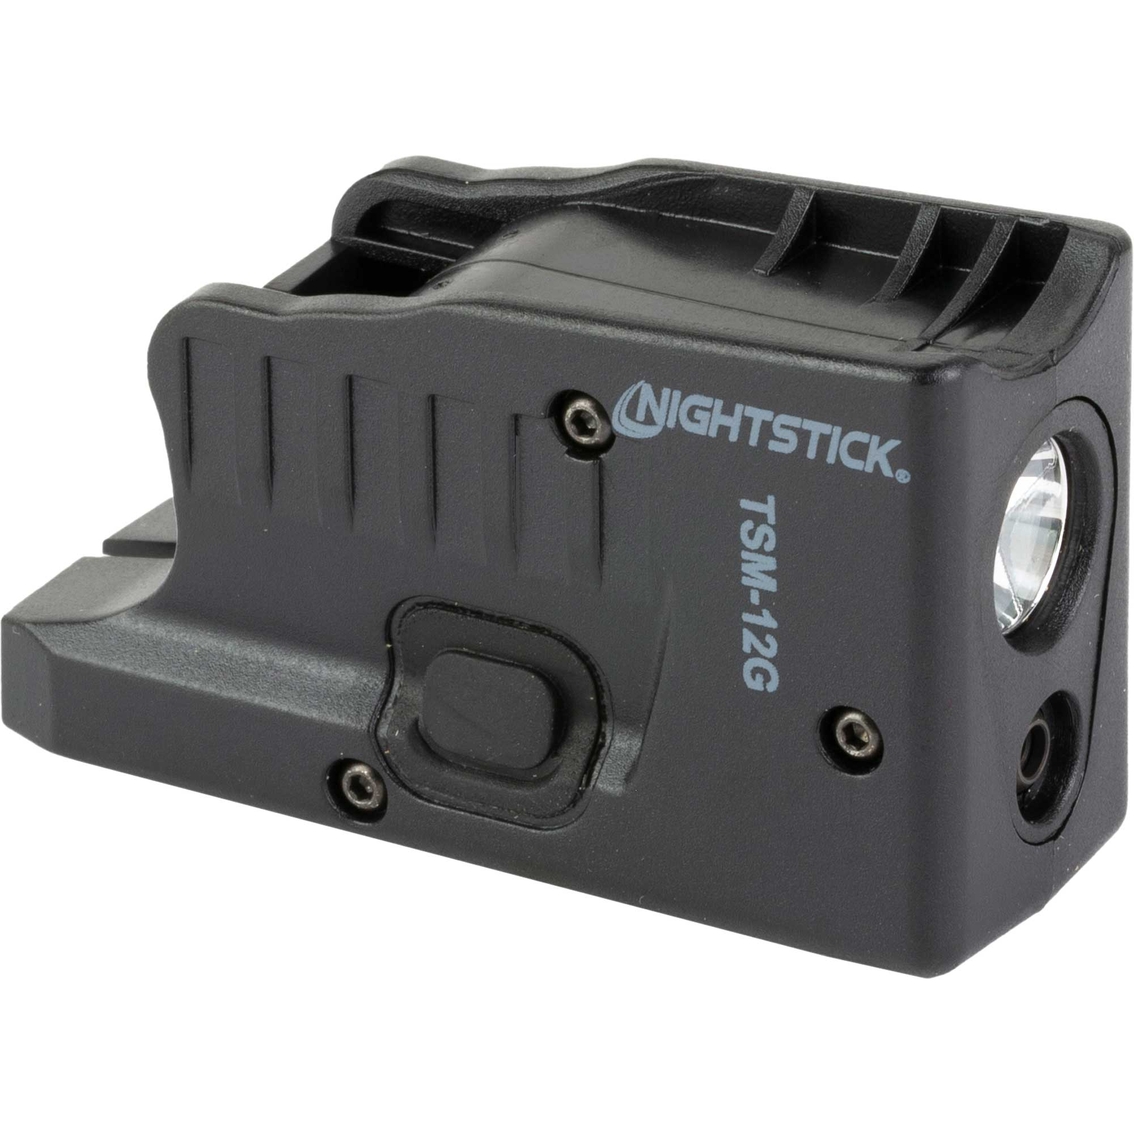 Nightstick Tsm-12g Compact Weaponlight With Green Laser For Glock 26/27 ...